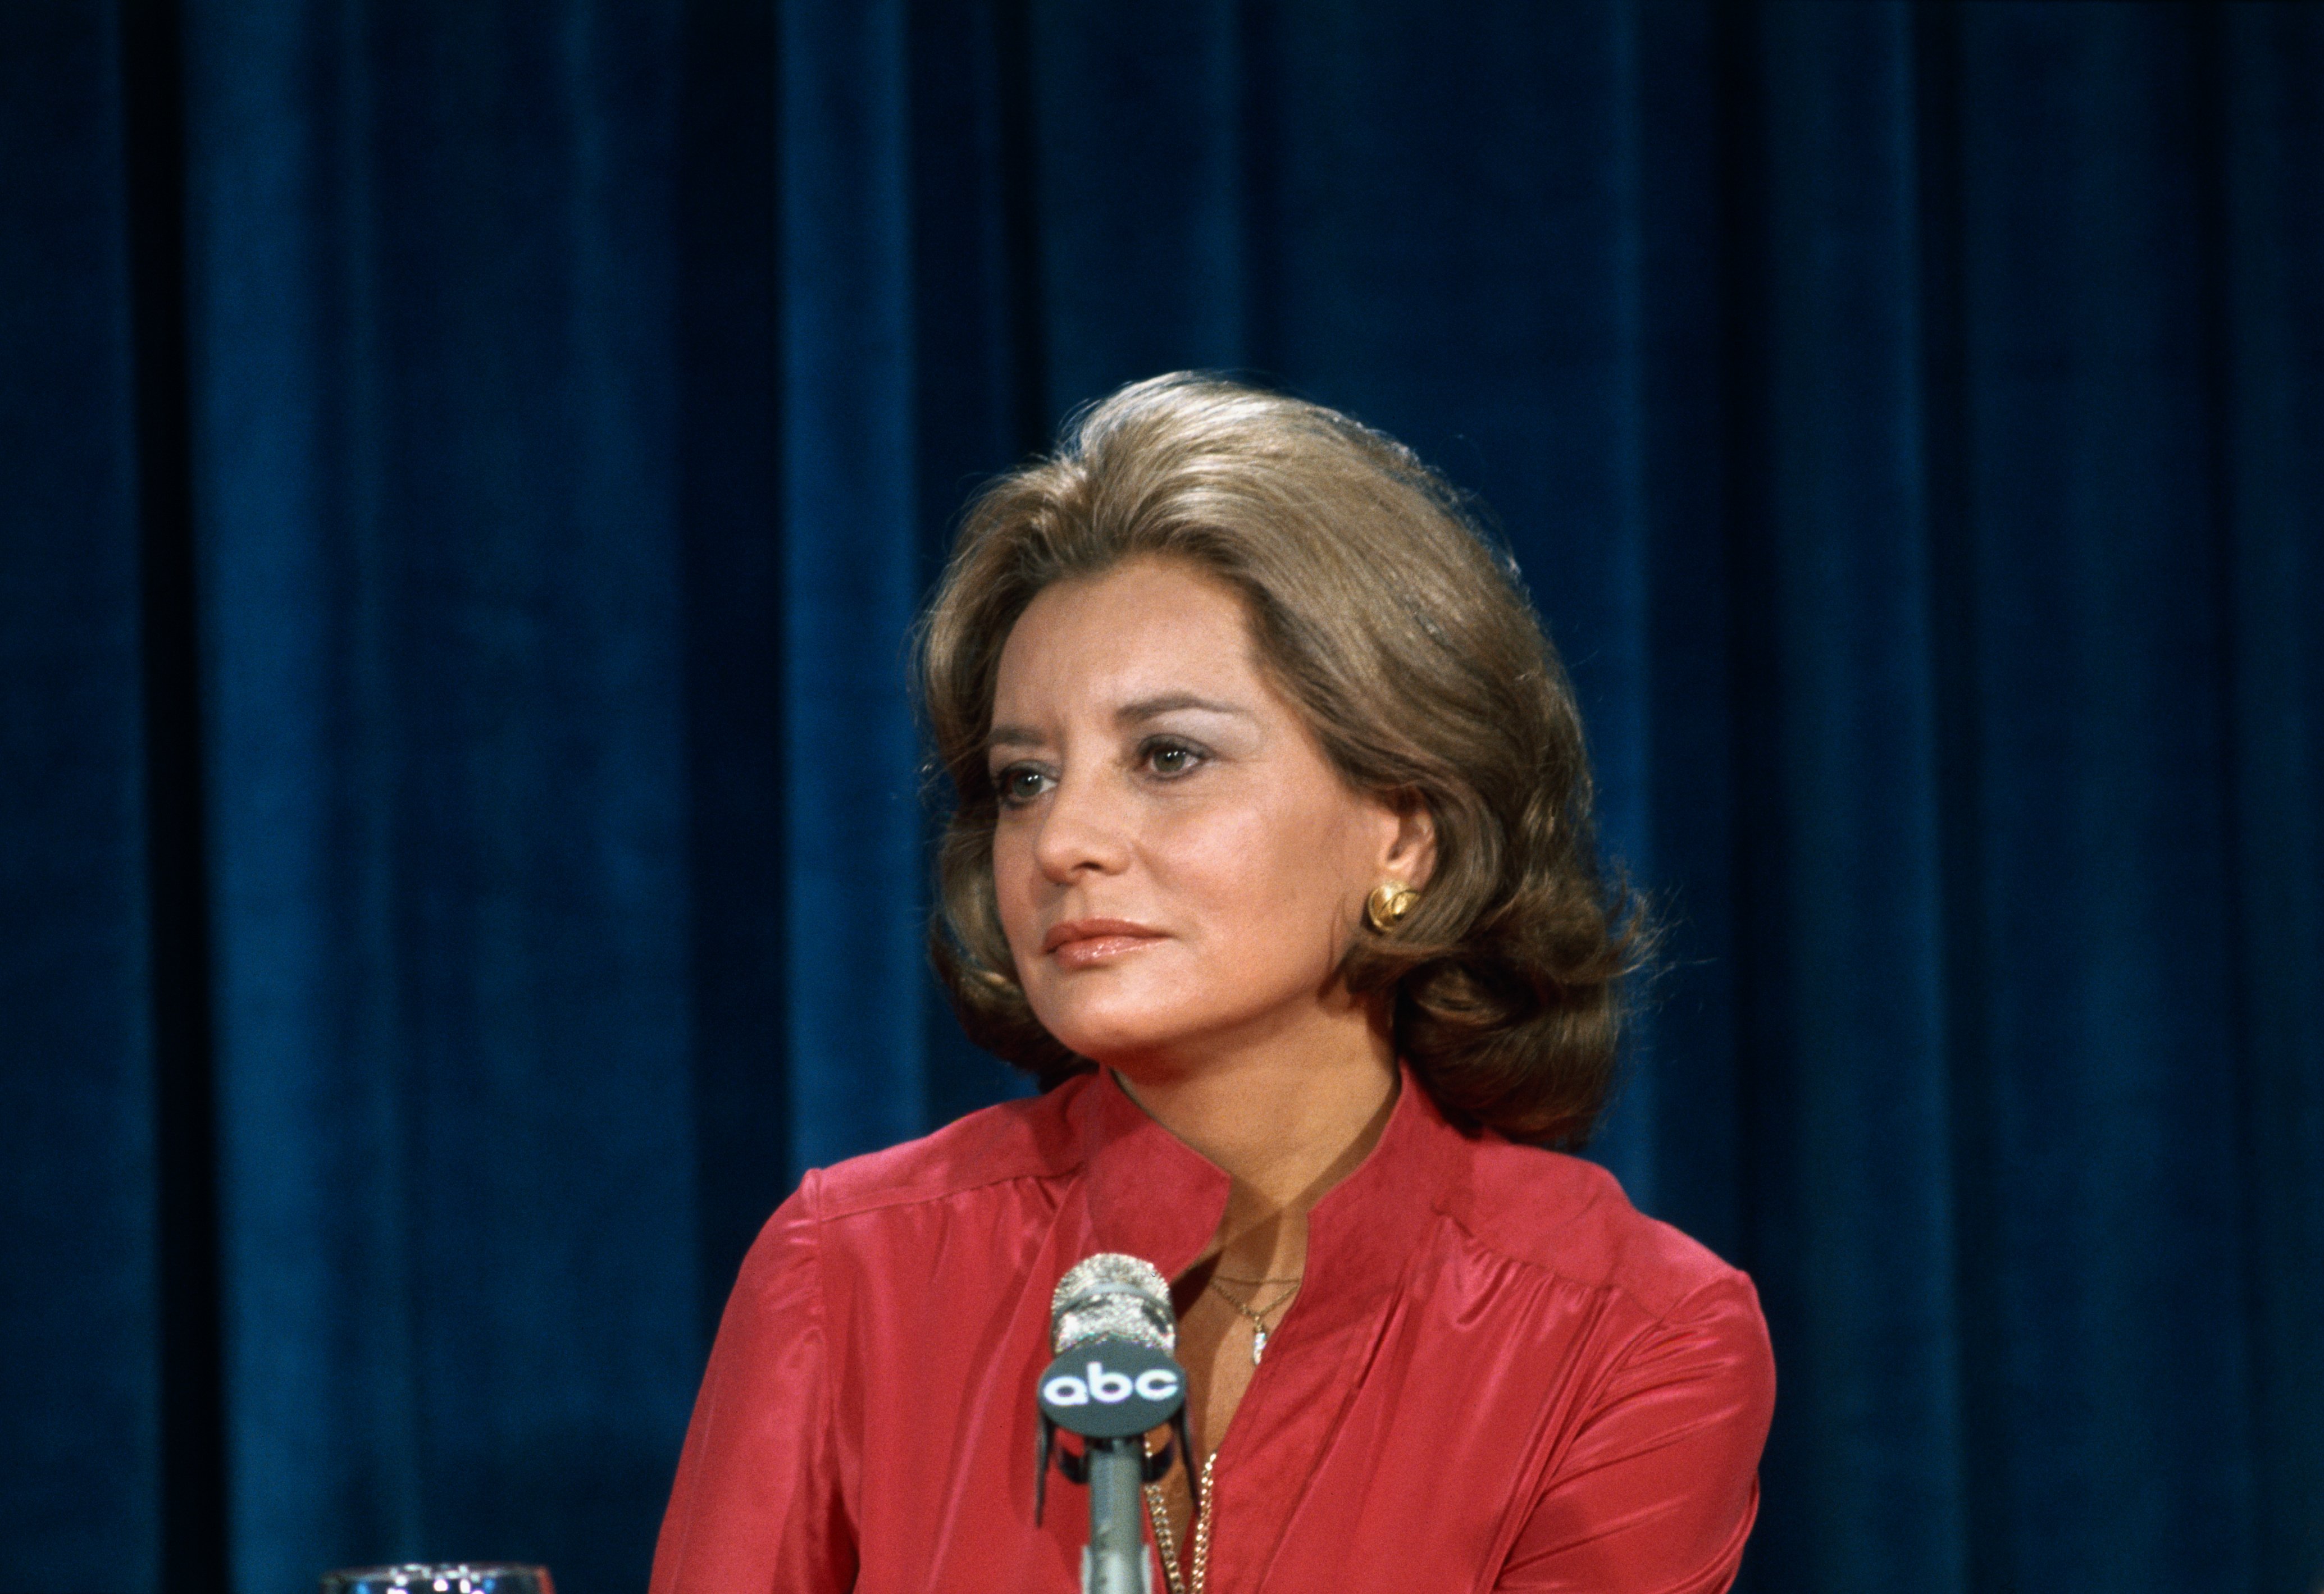 Television personality Barbara Walters during a press conference on September 30, 1976 in New York ┃Source: Getty Images